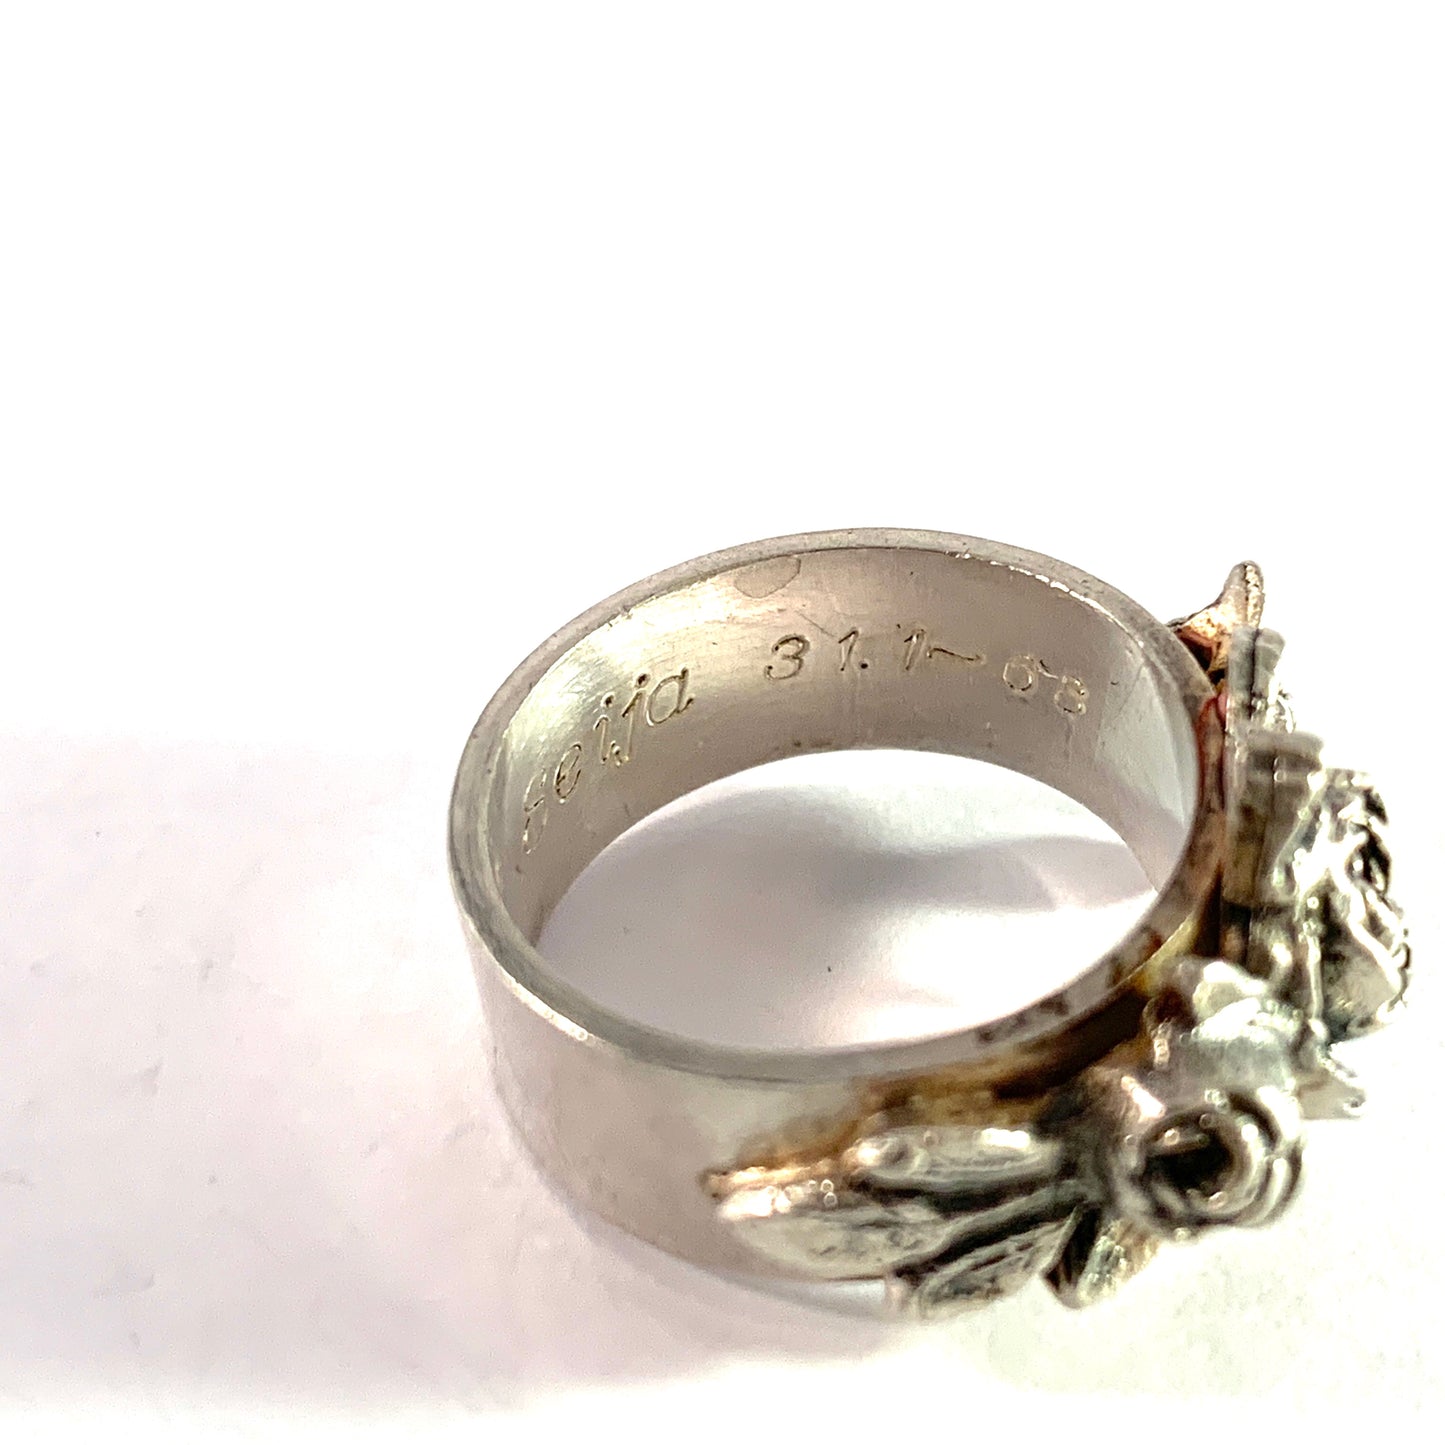 Turun Hopea, Finland 1967. Solid Silver Rose Flower Ring.